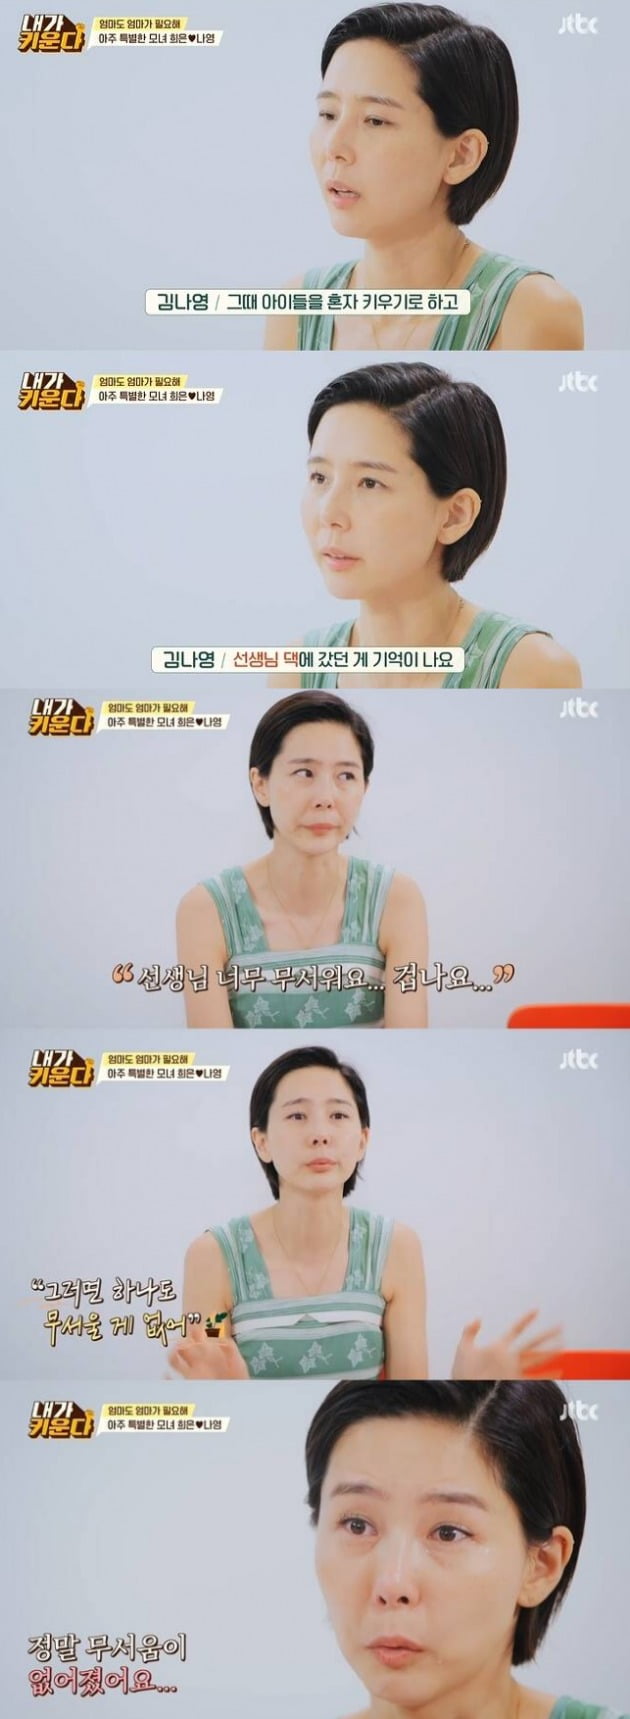 Broadcaster Kim Na-young said he was able to courage Solo Parenting thanks to Singer Yang Hee-eun.Yang Hee-eun was a bit of a mother of Kim Na-young.JTBC entertainment Brave Solo Parenting - I Raise (hereinafter referred to as I Raise), which was broadcast on the 30th, featured Yang Hee-eun visiting Kim Na-youngs house.Kim Na-young explained, I am a person who depends on me a lot. I was a great force when I was really hard. I died early.So there are times when I think that the teacher is like a mother. She is warm and takes care of a lot.Kim Na-young and Yang Hee-euns relationship was from Find Delicious TV in 2012.Kim Na-young said, I was very pretty, he said. Once I gave a small gift and a card on Childrens Day.I prepared it for the wounded child in you. It was a pat-down feeling when I read the card.Yang Hee-eun told the production team, It is hard to survive without an adult in the entertainment industry.I dont have children, so I want to be the adult I need. I cant explain how I feel.I want Na Young to be my daughter. Yang Hee-eun said, I am sick of Shinwoos being sick and tired. It is natural that there is no irony.I think it was a lot of hardship and hardship, but you were big and the children were big. Do you remember the hardest time raising two Alone children? Kim Na-young said, The first time was the hardest. At first, I thought, Can I do two children with Alone?Kim Na-young said in an interview, I remember going to your house to raise Alone and I went to your house.Im scared, he said, I just listen to your heart quietly, and then I do not have any fear. Yang Hee-eun said, My mother raised three daughters and a child. It was quick and accurate, unlike the decisions of those days.I can not talk about it right and wrong, but I think I did well when I see Na Young Lee. I saw a book written by Na Young. Before entering elementary school, my mother left the world.I thought, I want to be her mother, she said as she read the book.Kim Na-young sent a video letter to Yang Hee-eun, saying: Thank you so much, thank you for being here firmly, I hope you are healthy.Meanwhile, Kim Na-young announced her 2019 divorce, four years after her marriage.Kim Na-youngs Husband Choi was arrested on charges of illegally acquiring 20 billion won in illegal futures options without permission from the financial authorities.Kim Na-young divorced Husband after saying he was ignorant of the business and would pay the full price.